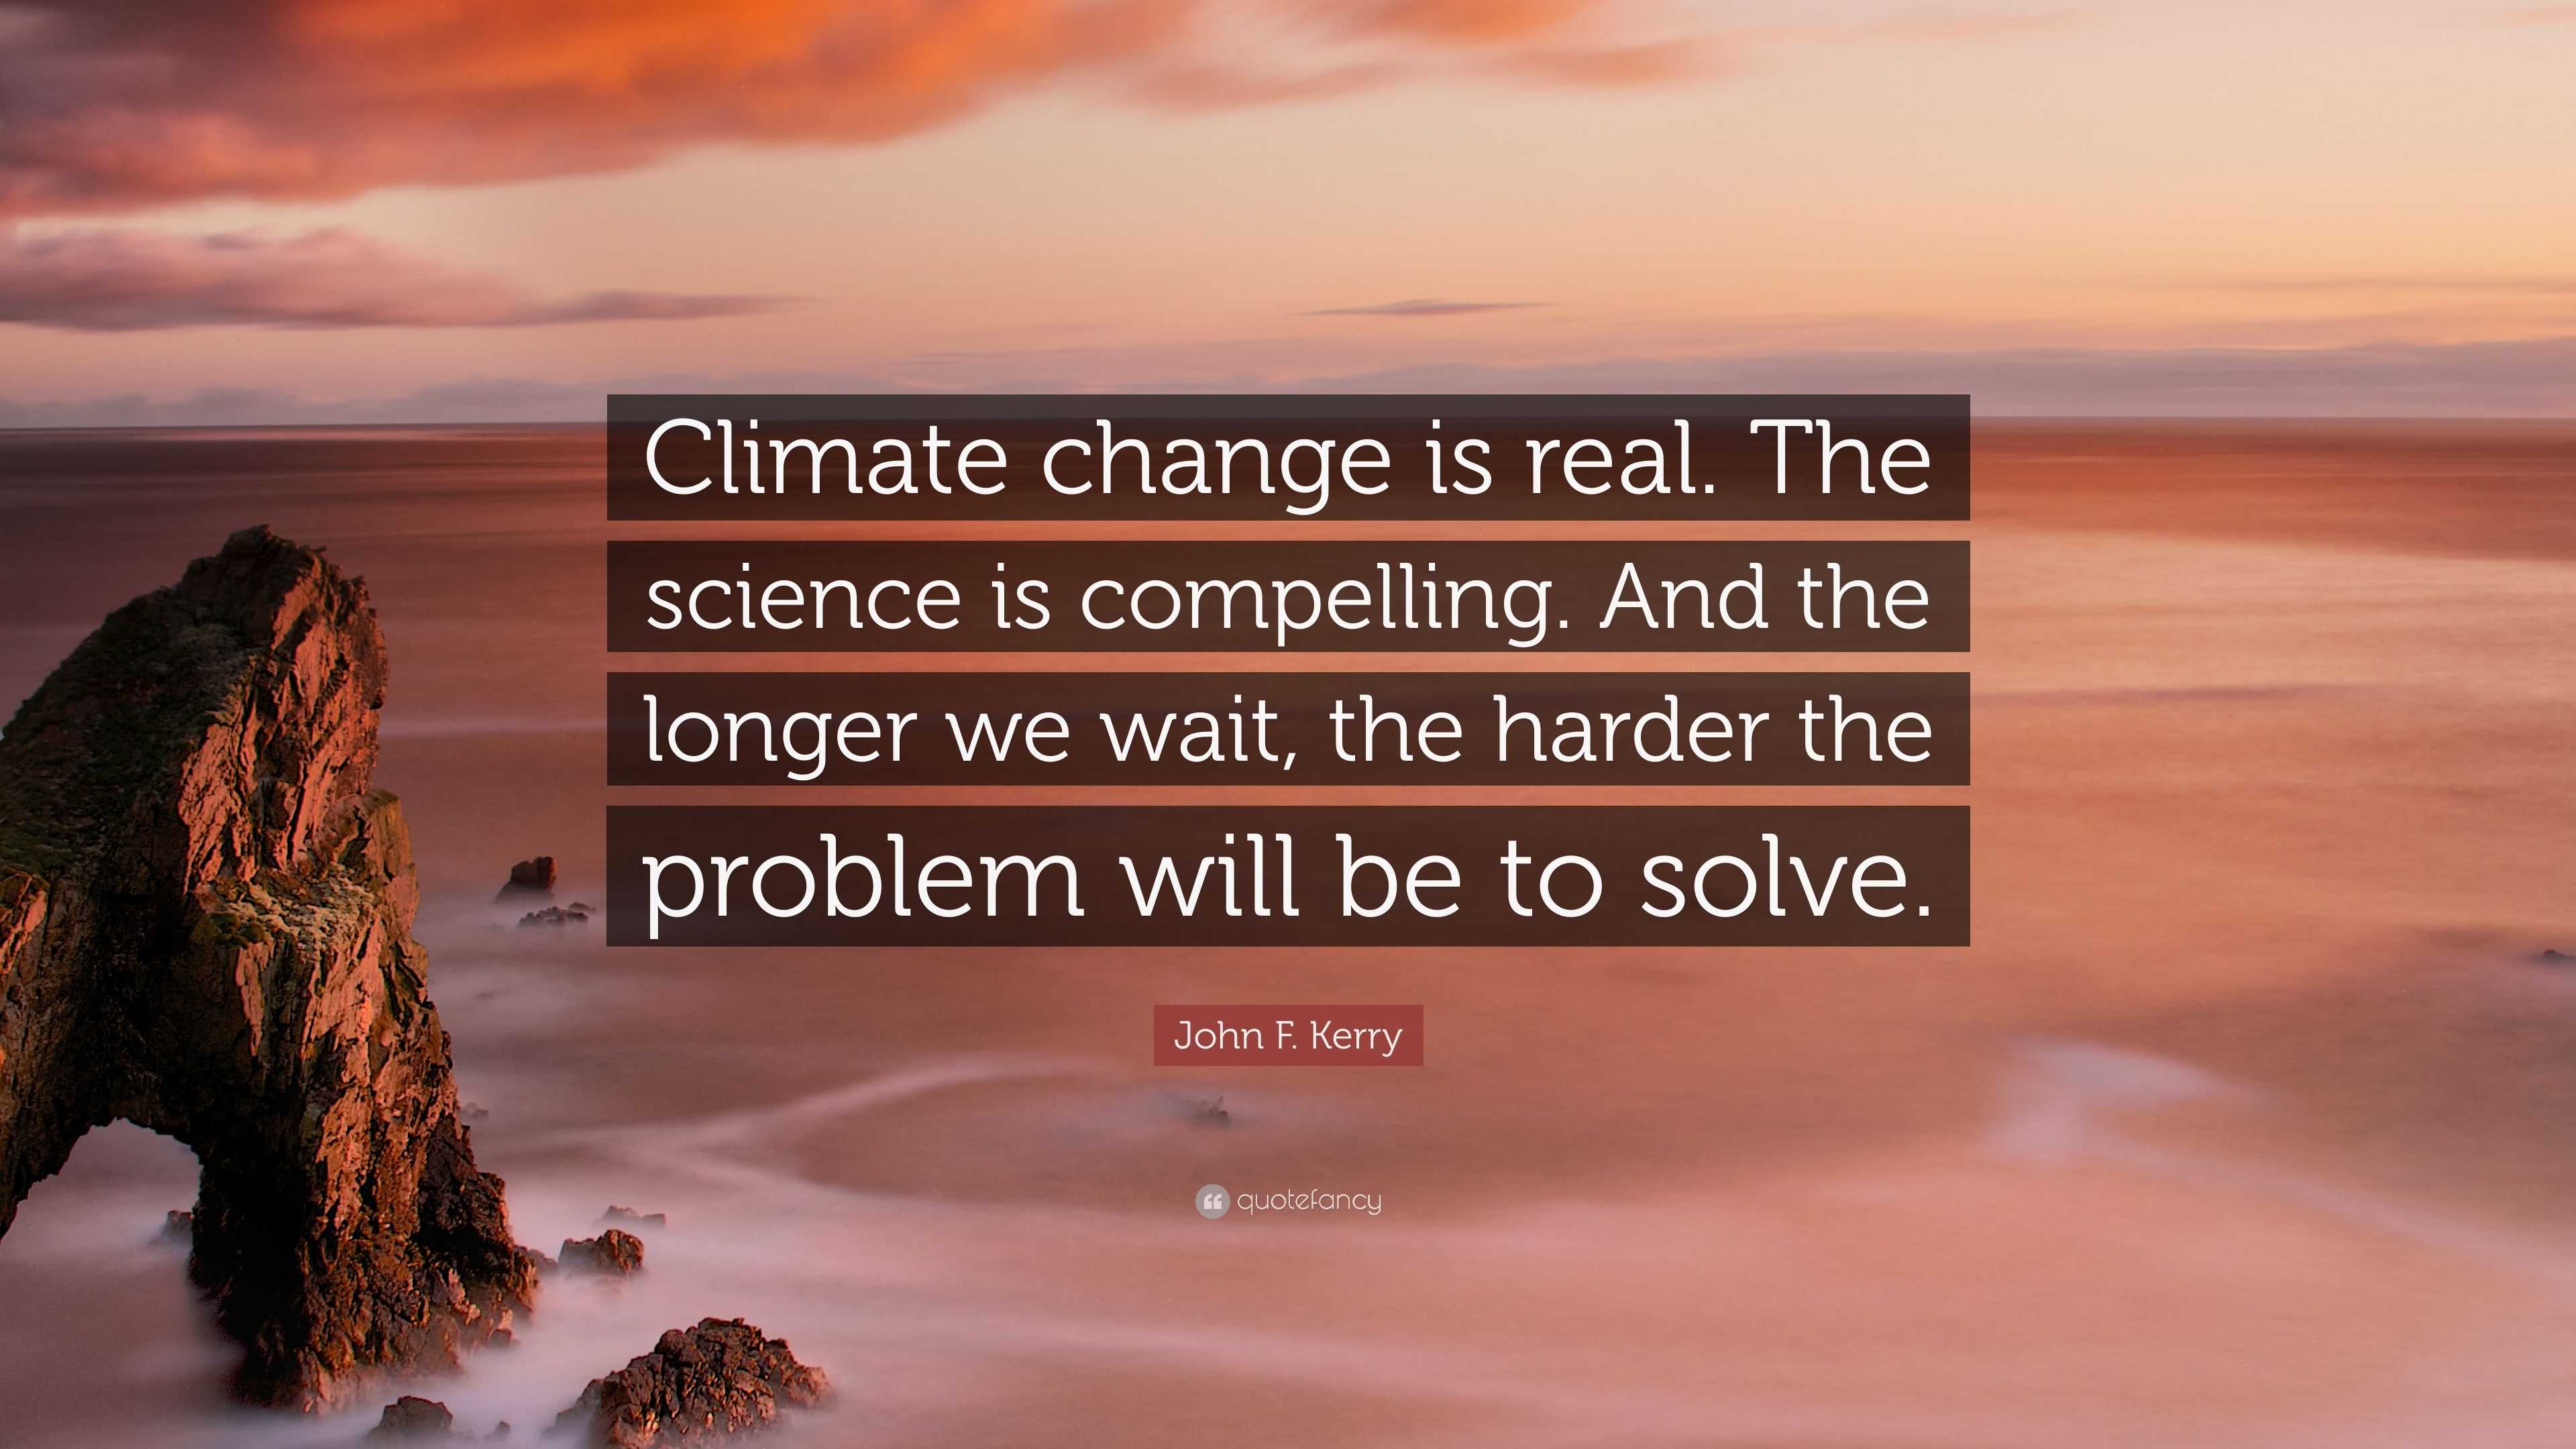 John F. Kerry Quote: “Climate change is real. The science is compelling ...